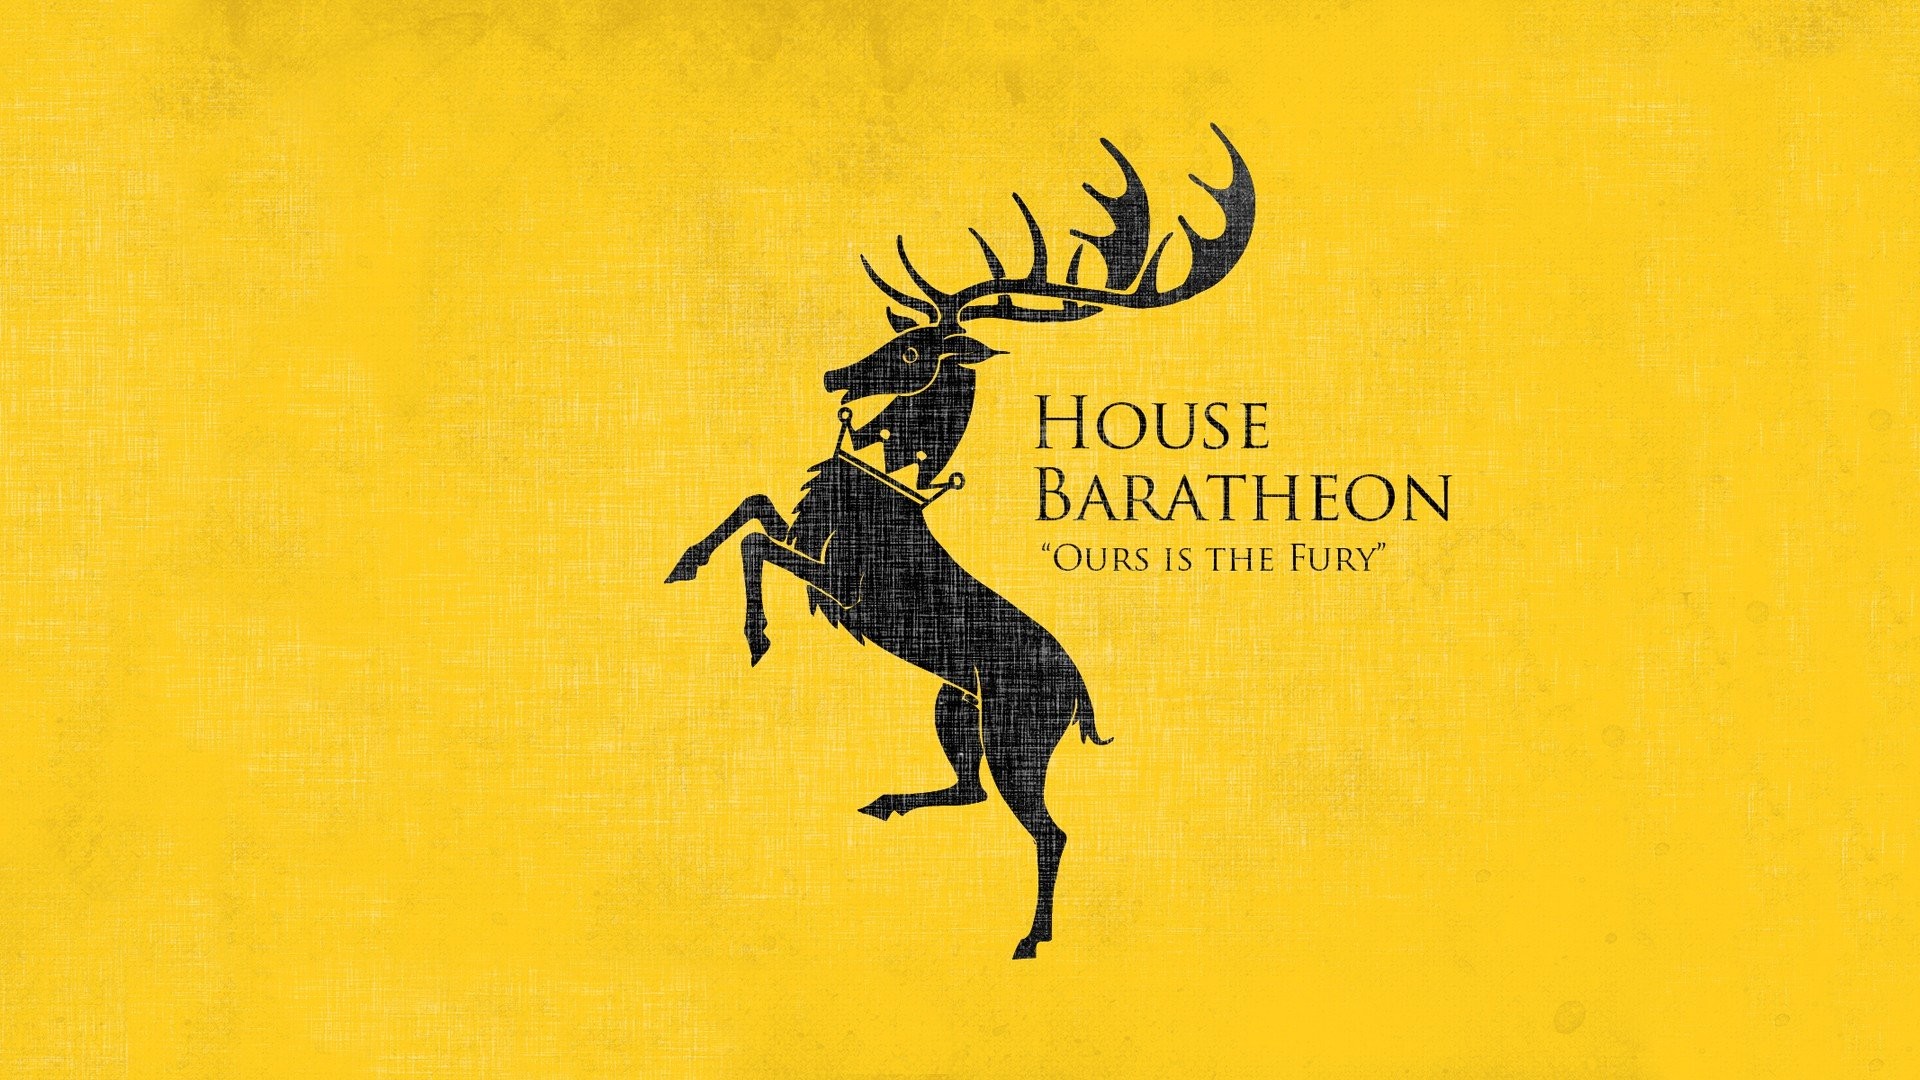 House Baratheon Game of Thrones Wallpaper HD with high-resolution 1920x1080 pixel. You can use this poster wallpaper for your Desktop Computers, Mac Screensavers, Windows Backgrounds, iPhone Wallpapers, Tablet or Android Lock screen and another Mobile device